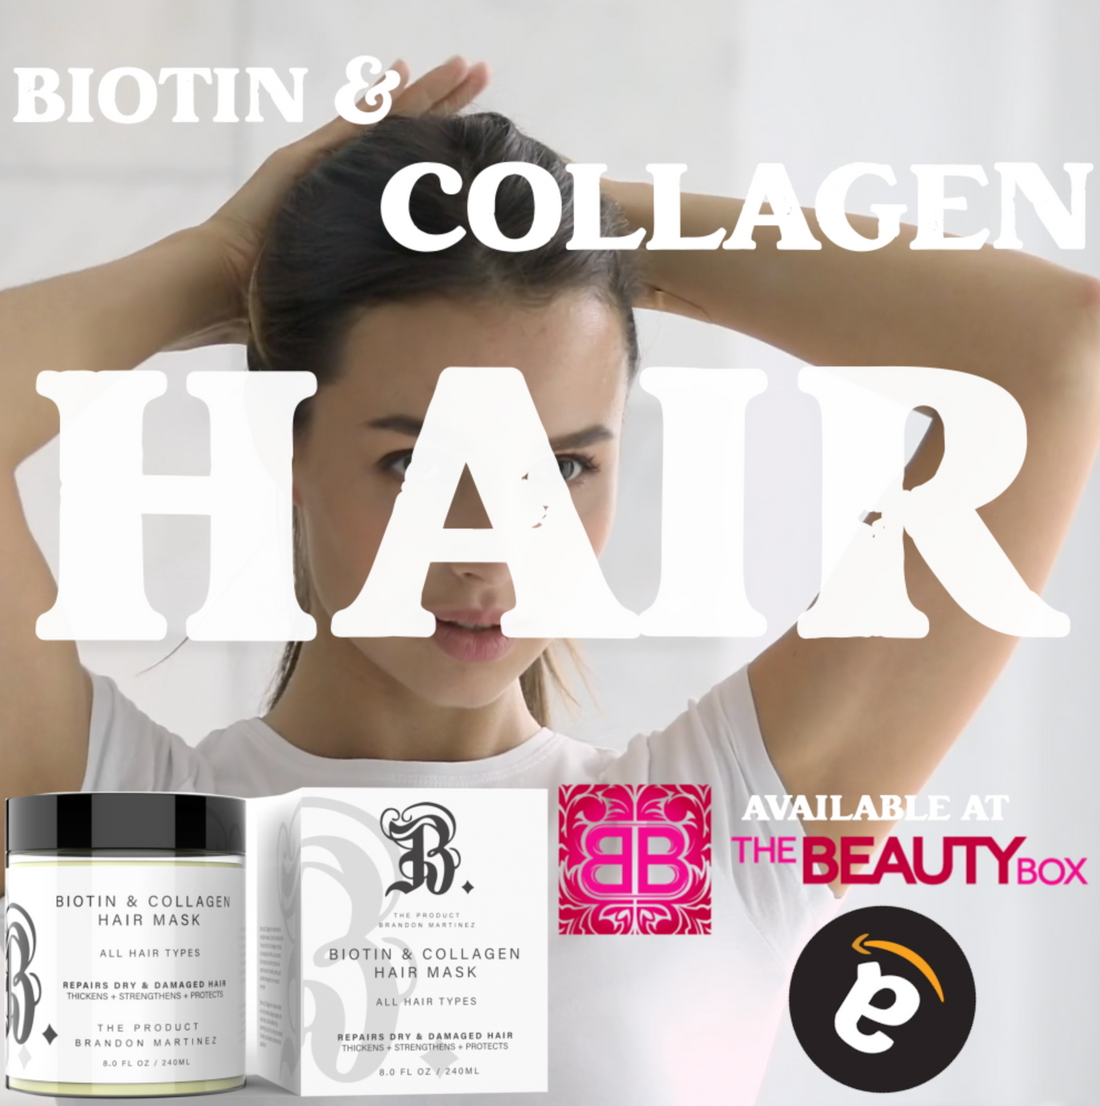 Worried about hair loss? Want to try something natural? We use so many amazing ingredients like #biotin #collagen #avocado #vitamine in our new #hairmask that's available on Amazon, Walmart, The Beauty Box, and B. The Product.